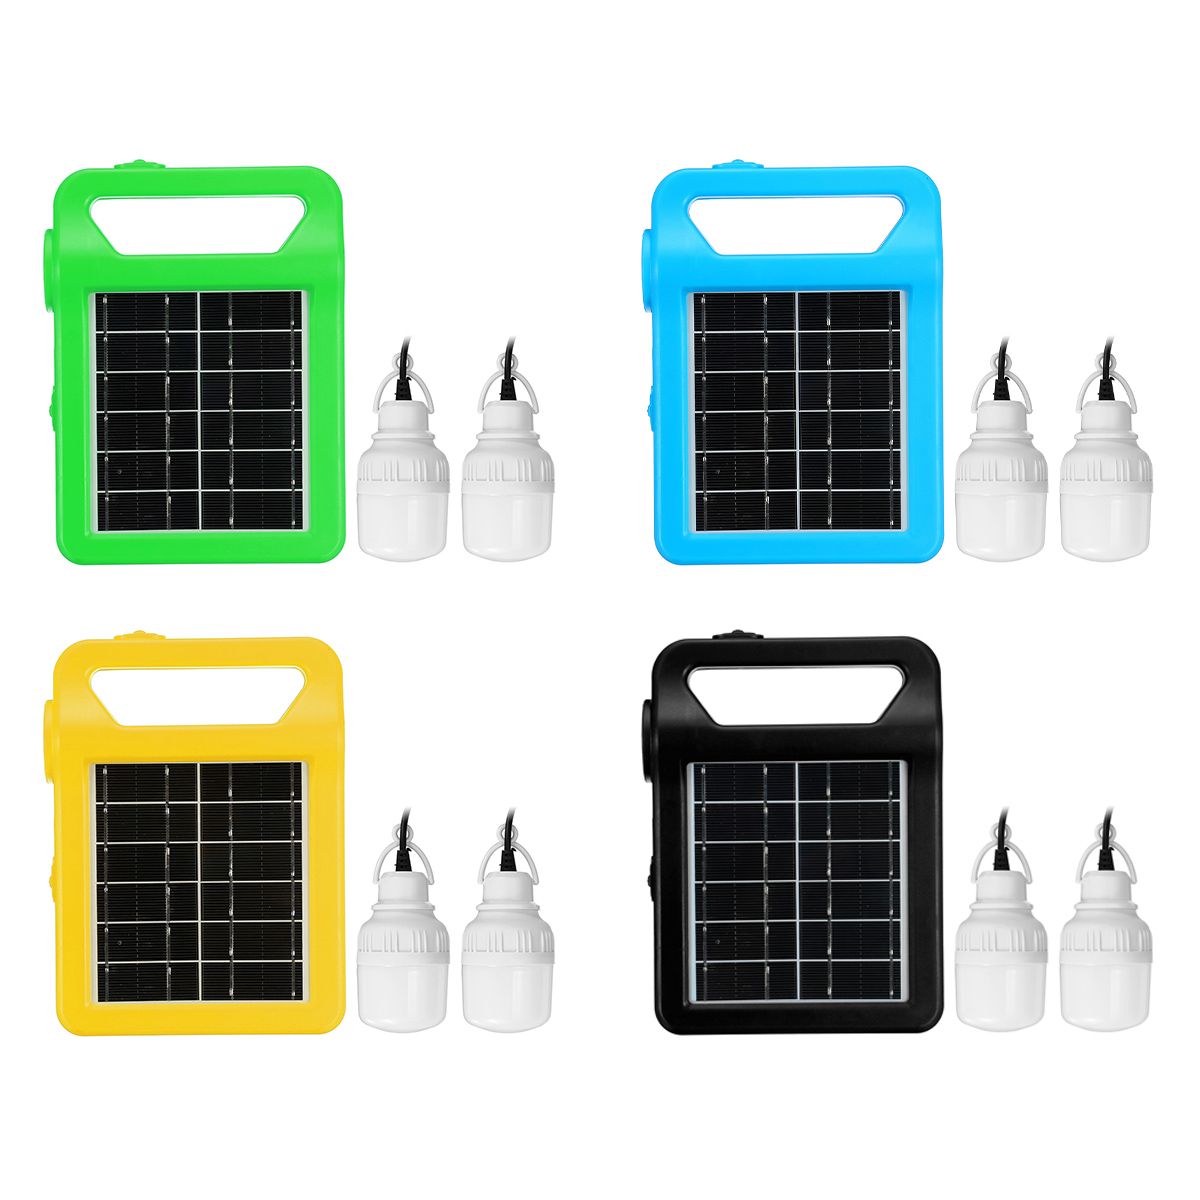 5-In-1-Solar-Generator-System-Portable-Emergency-Light-Camping-Lamp-with-2PCS-3W-LED-Bulb-1754338